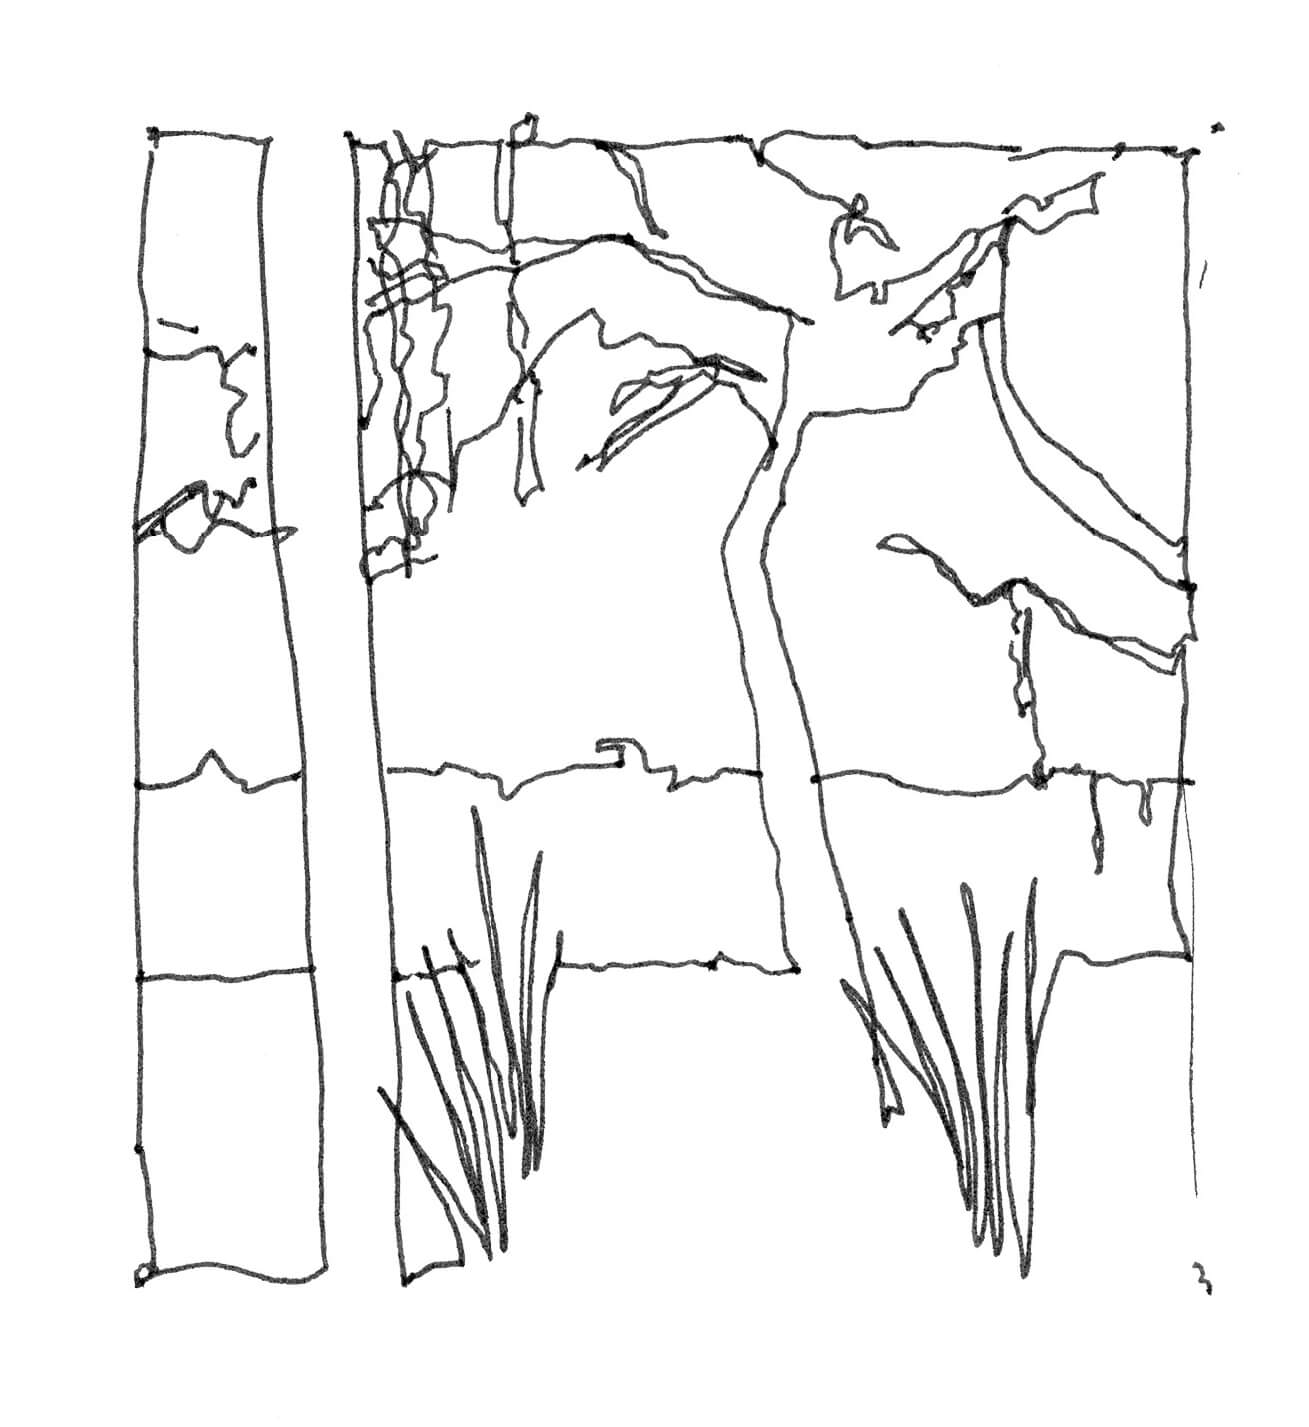 a blind contour drawing of a flooded florida river